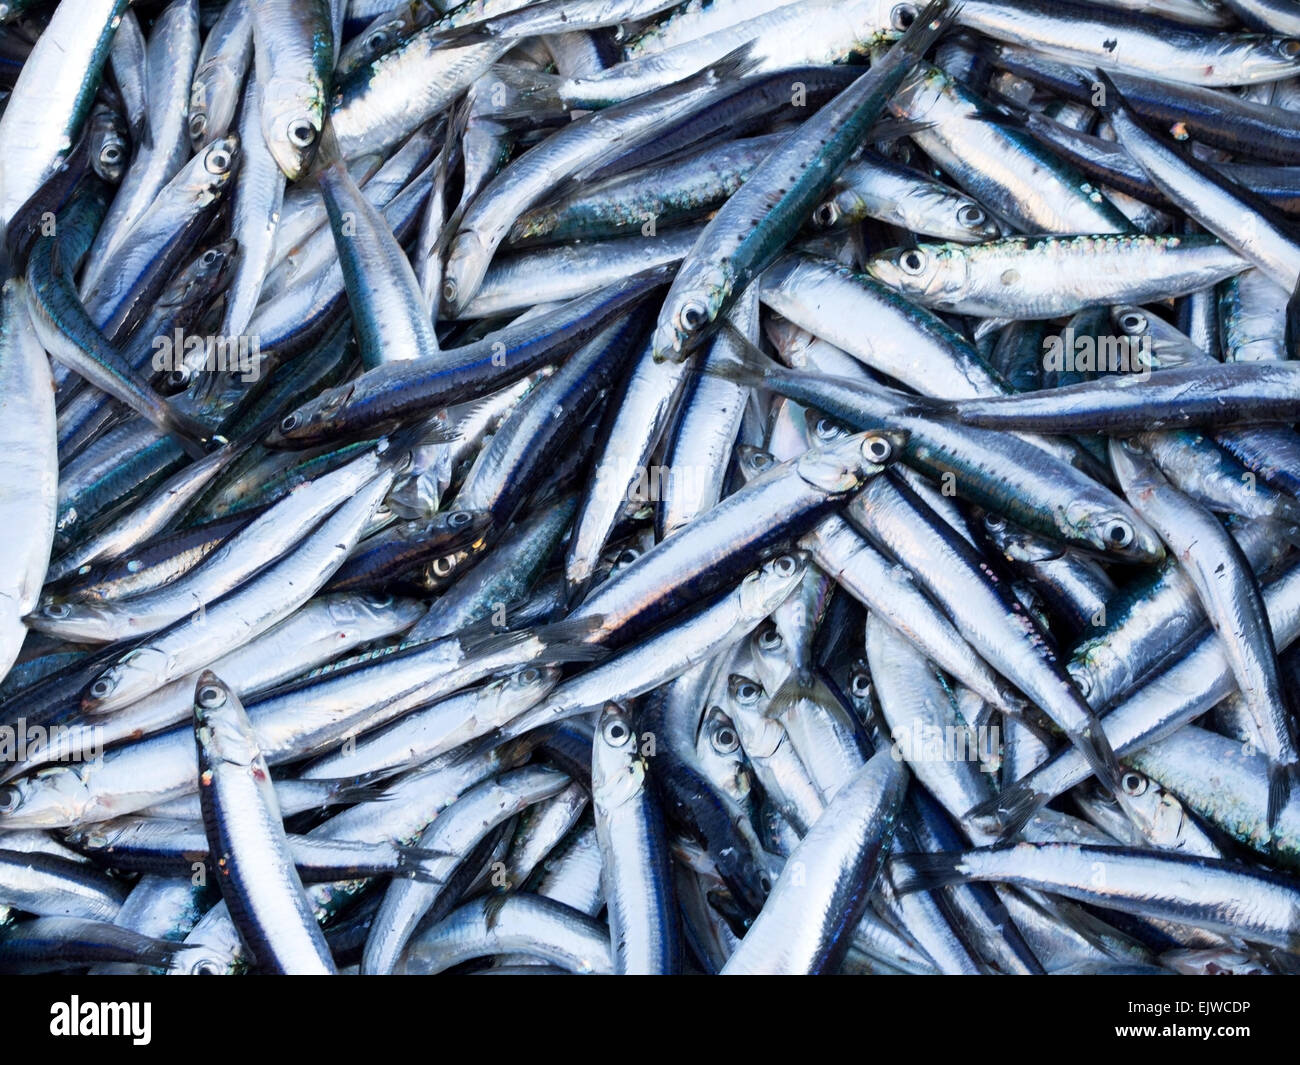 Fresh catch of sardines and anchovies on market, shoot from above Stock Photo